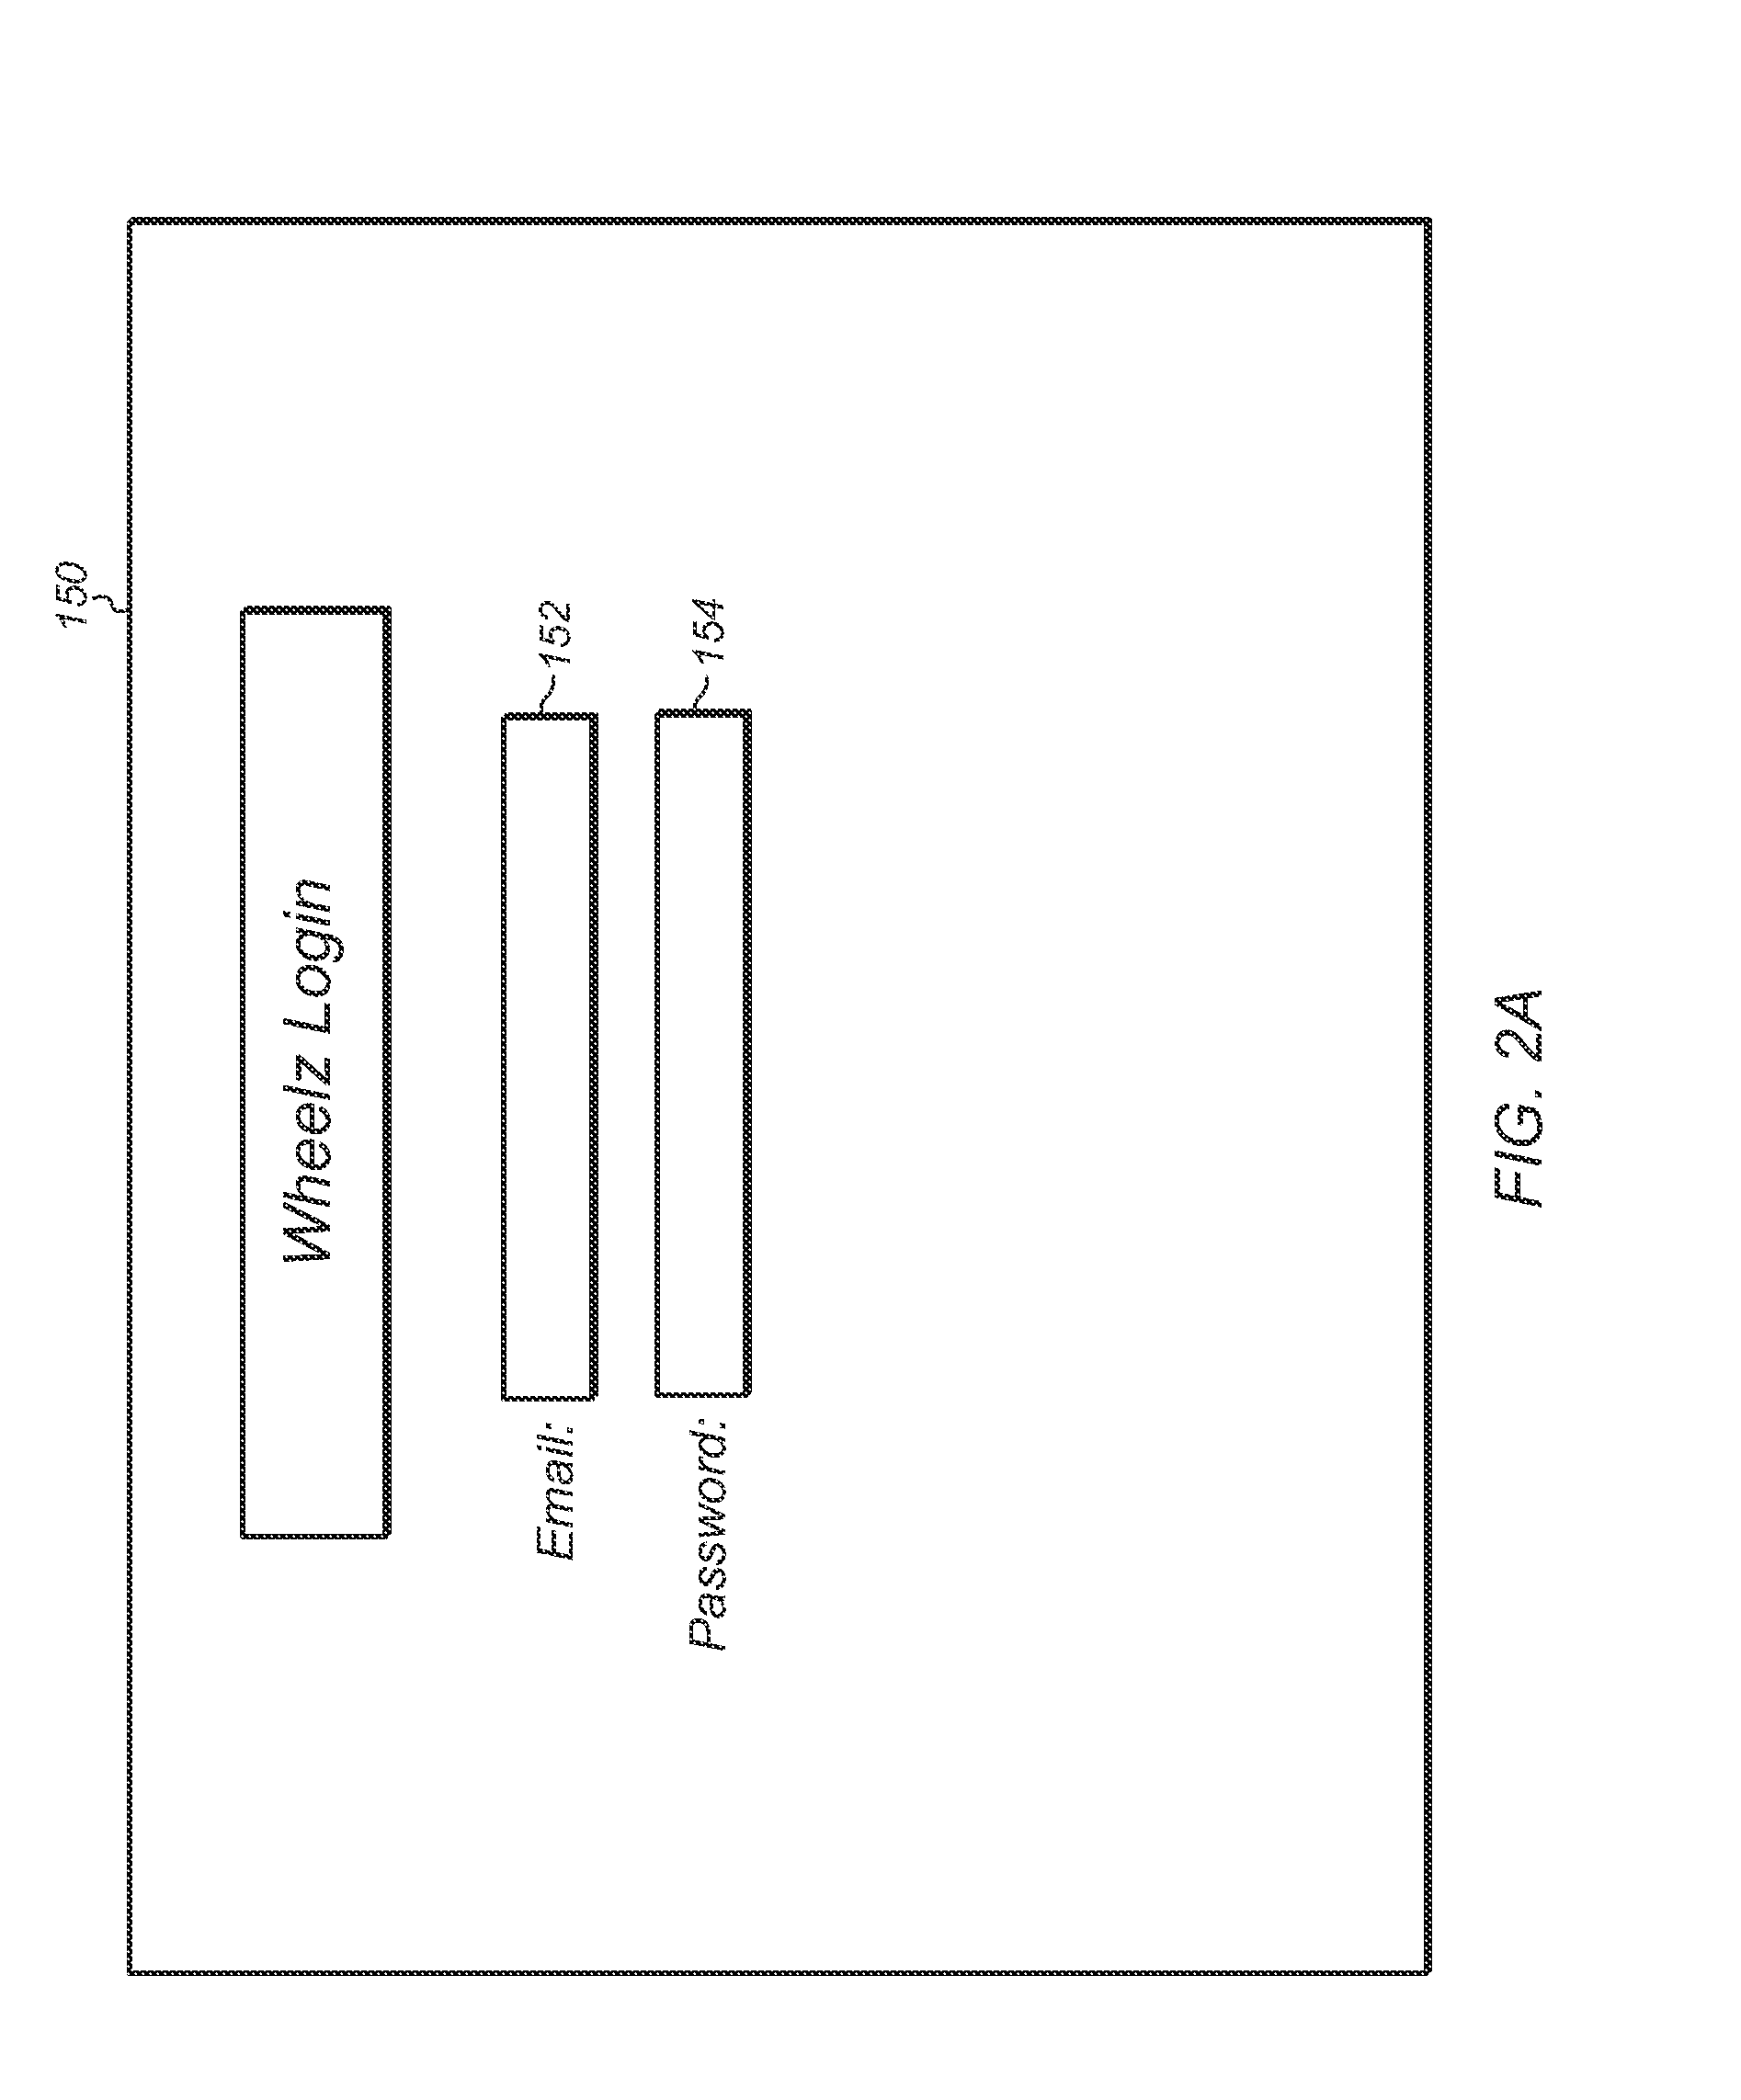 Shared vehicle rental system including vehicle availability determination